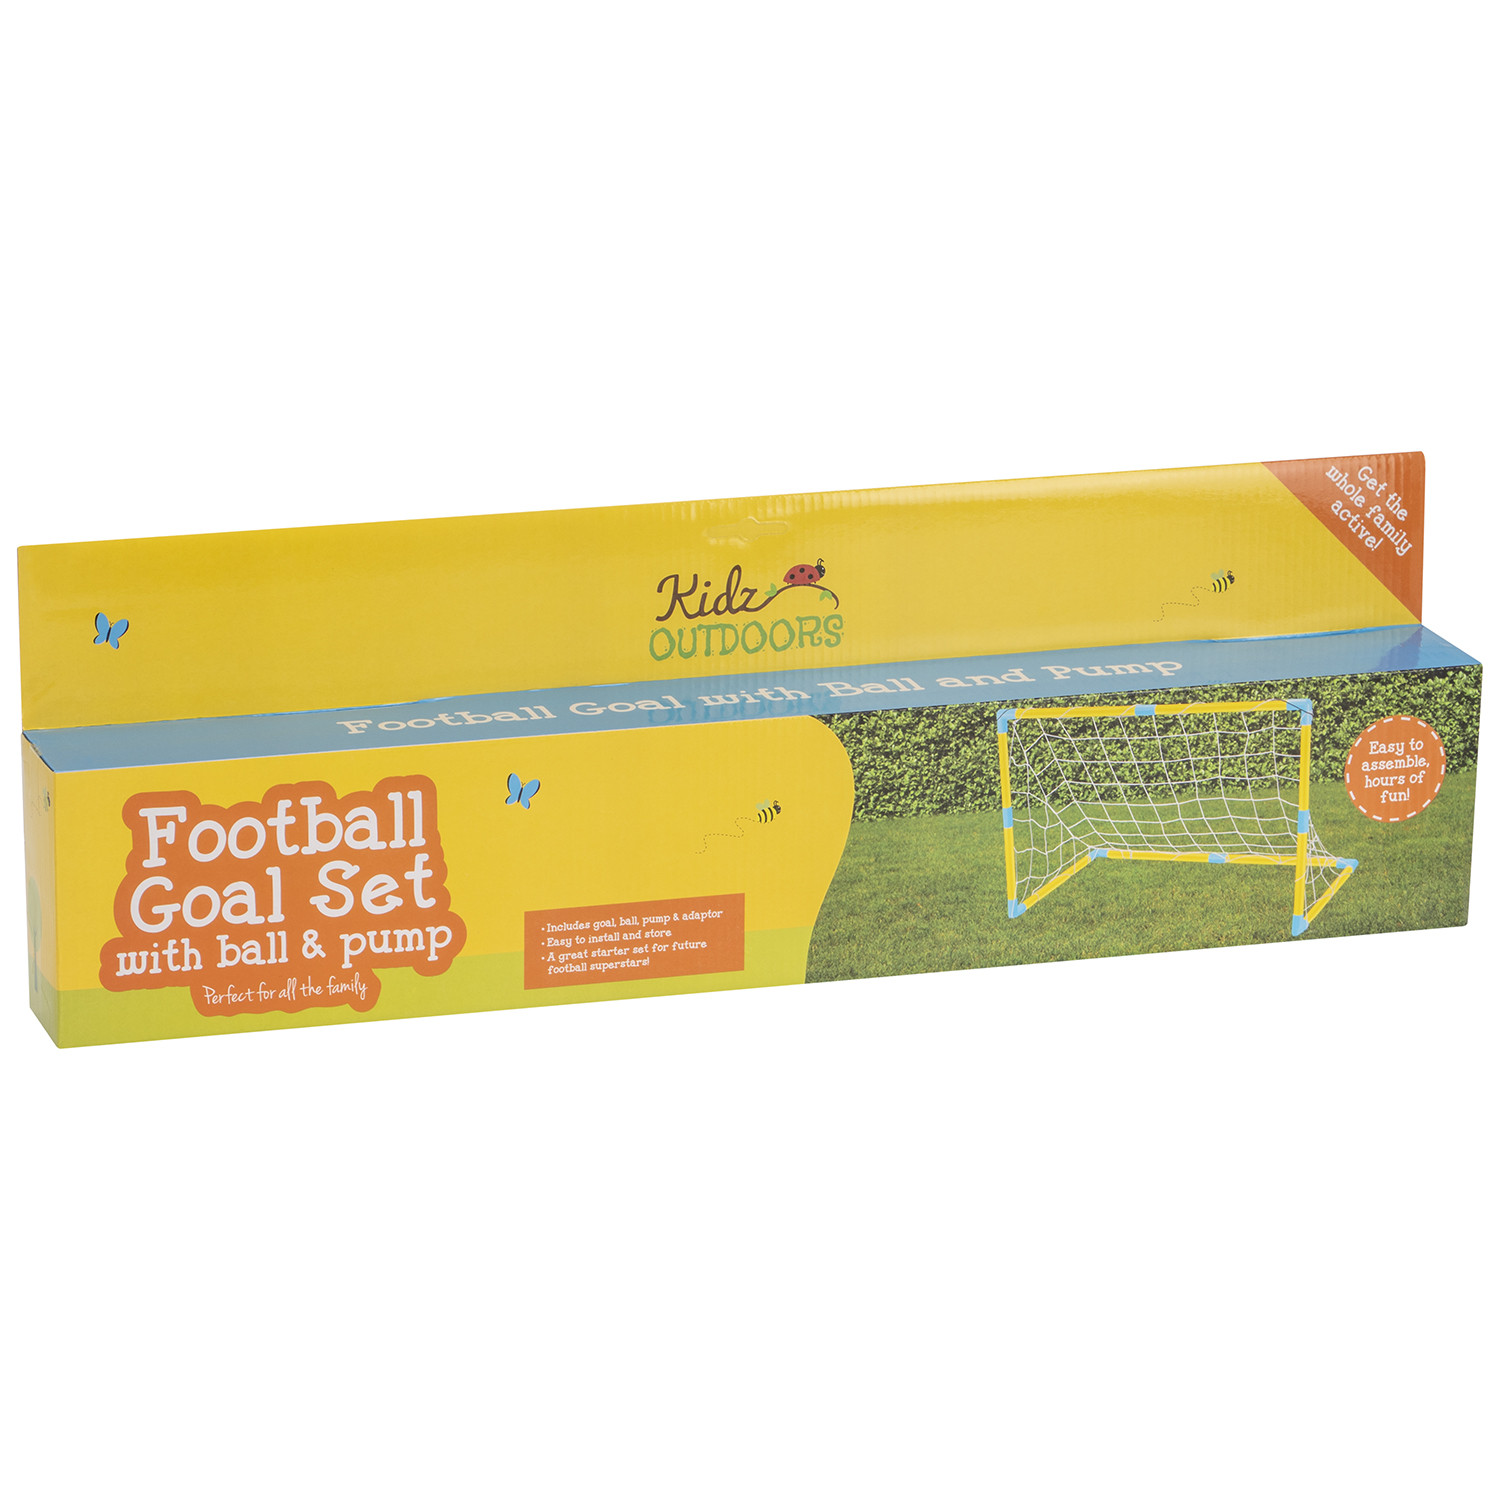 Football Goal With Ball And Pump Image